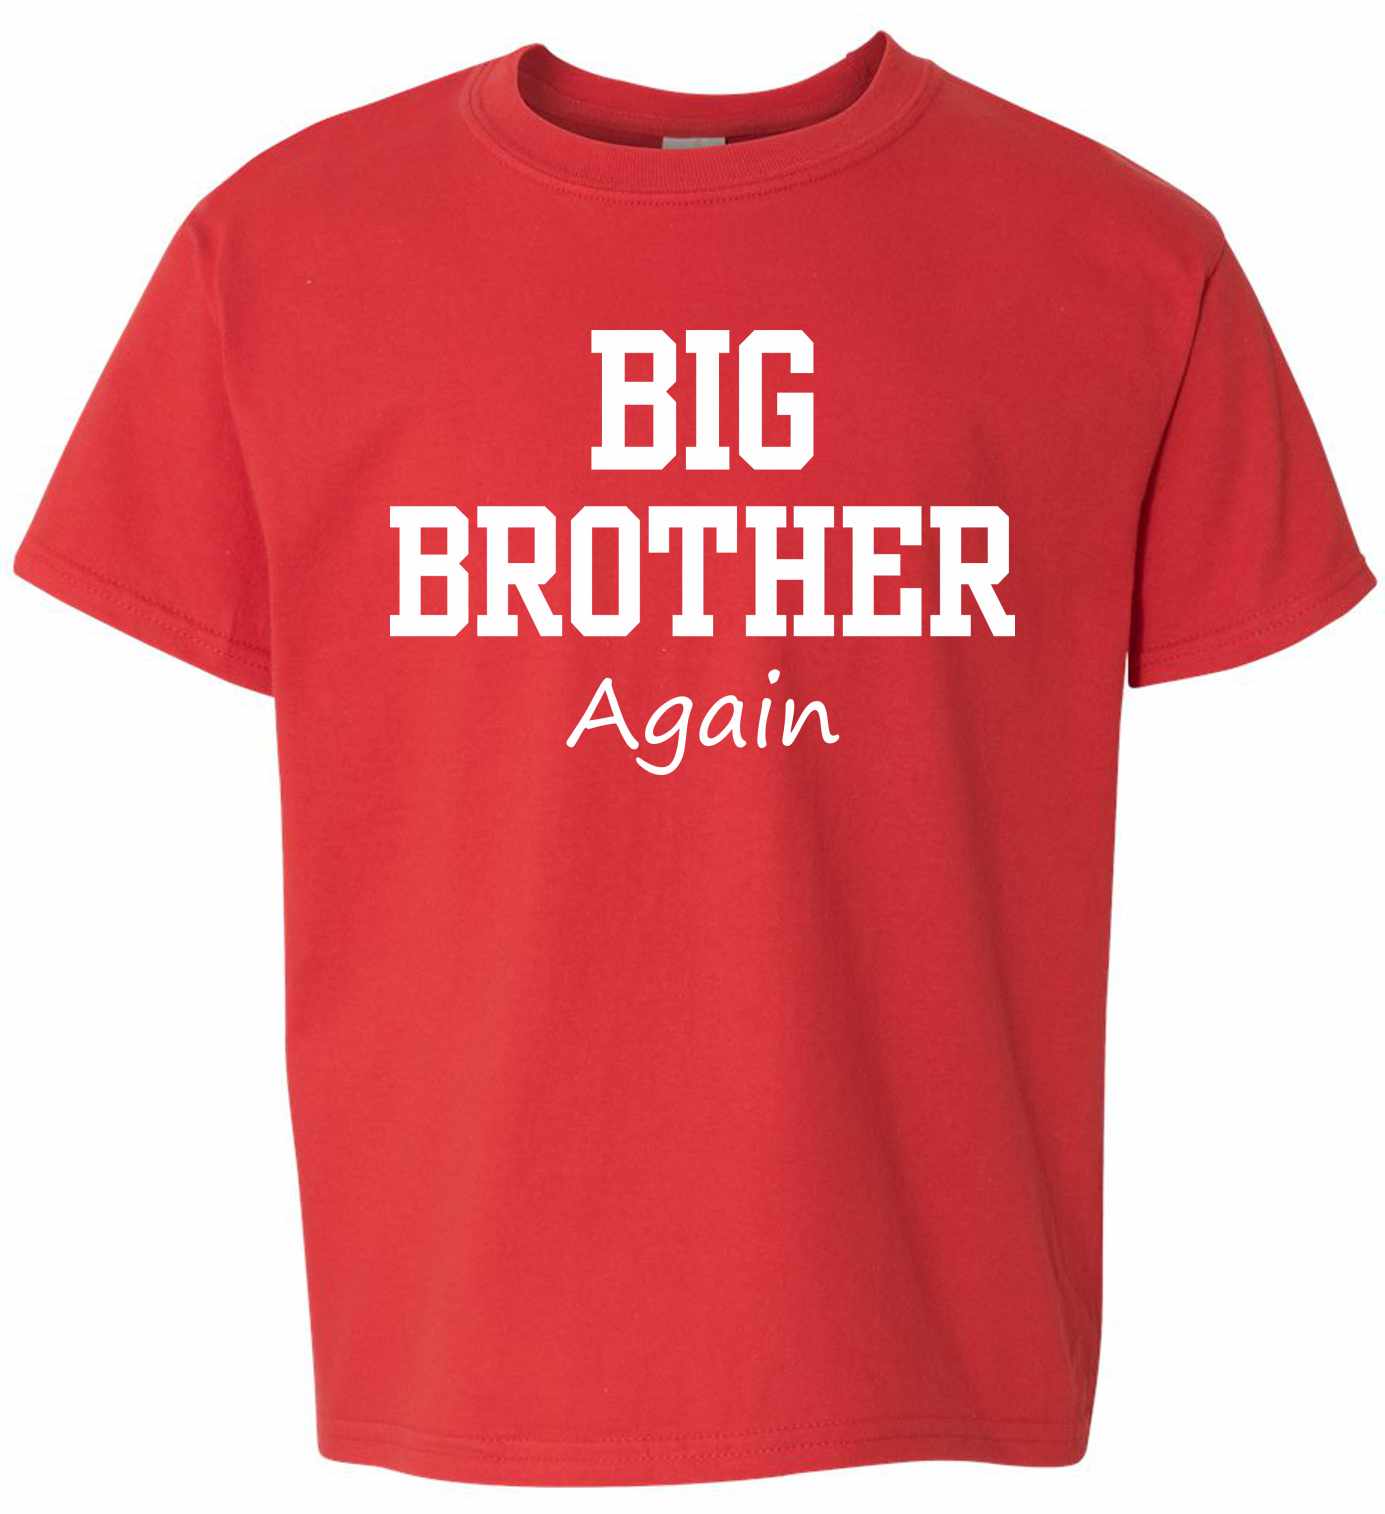 Big Brother Again on Youth T-Shirt